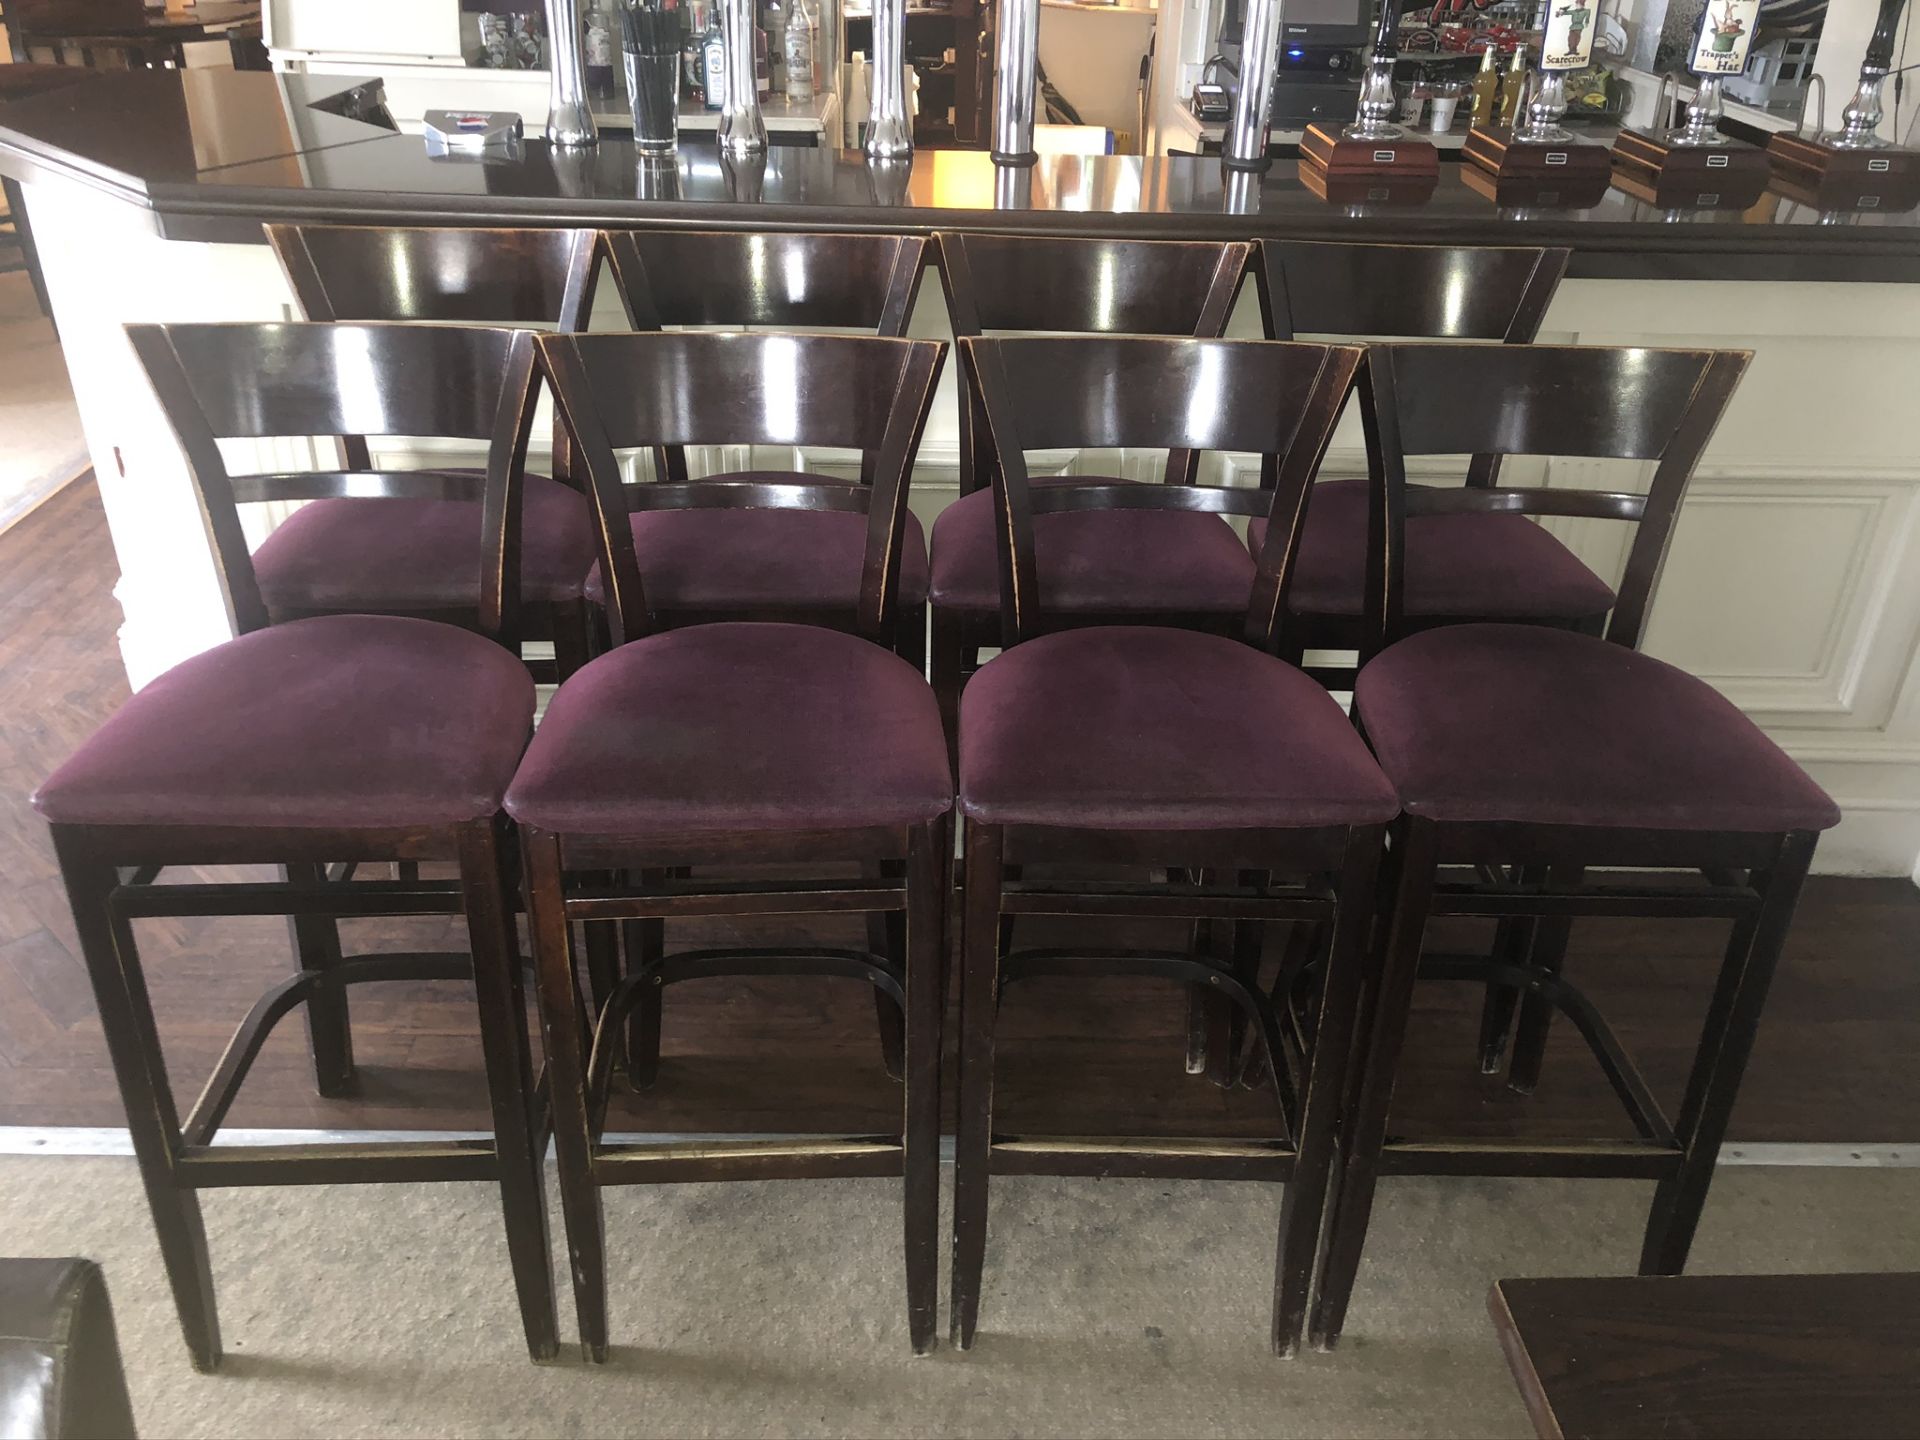 8 x Wooden Bar Chairs w/ Cushioned Seating in Purple - Image 2 of 3